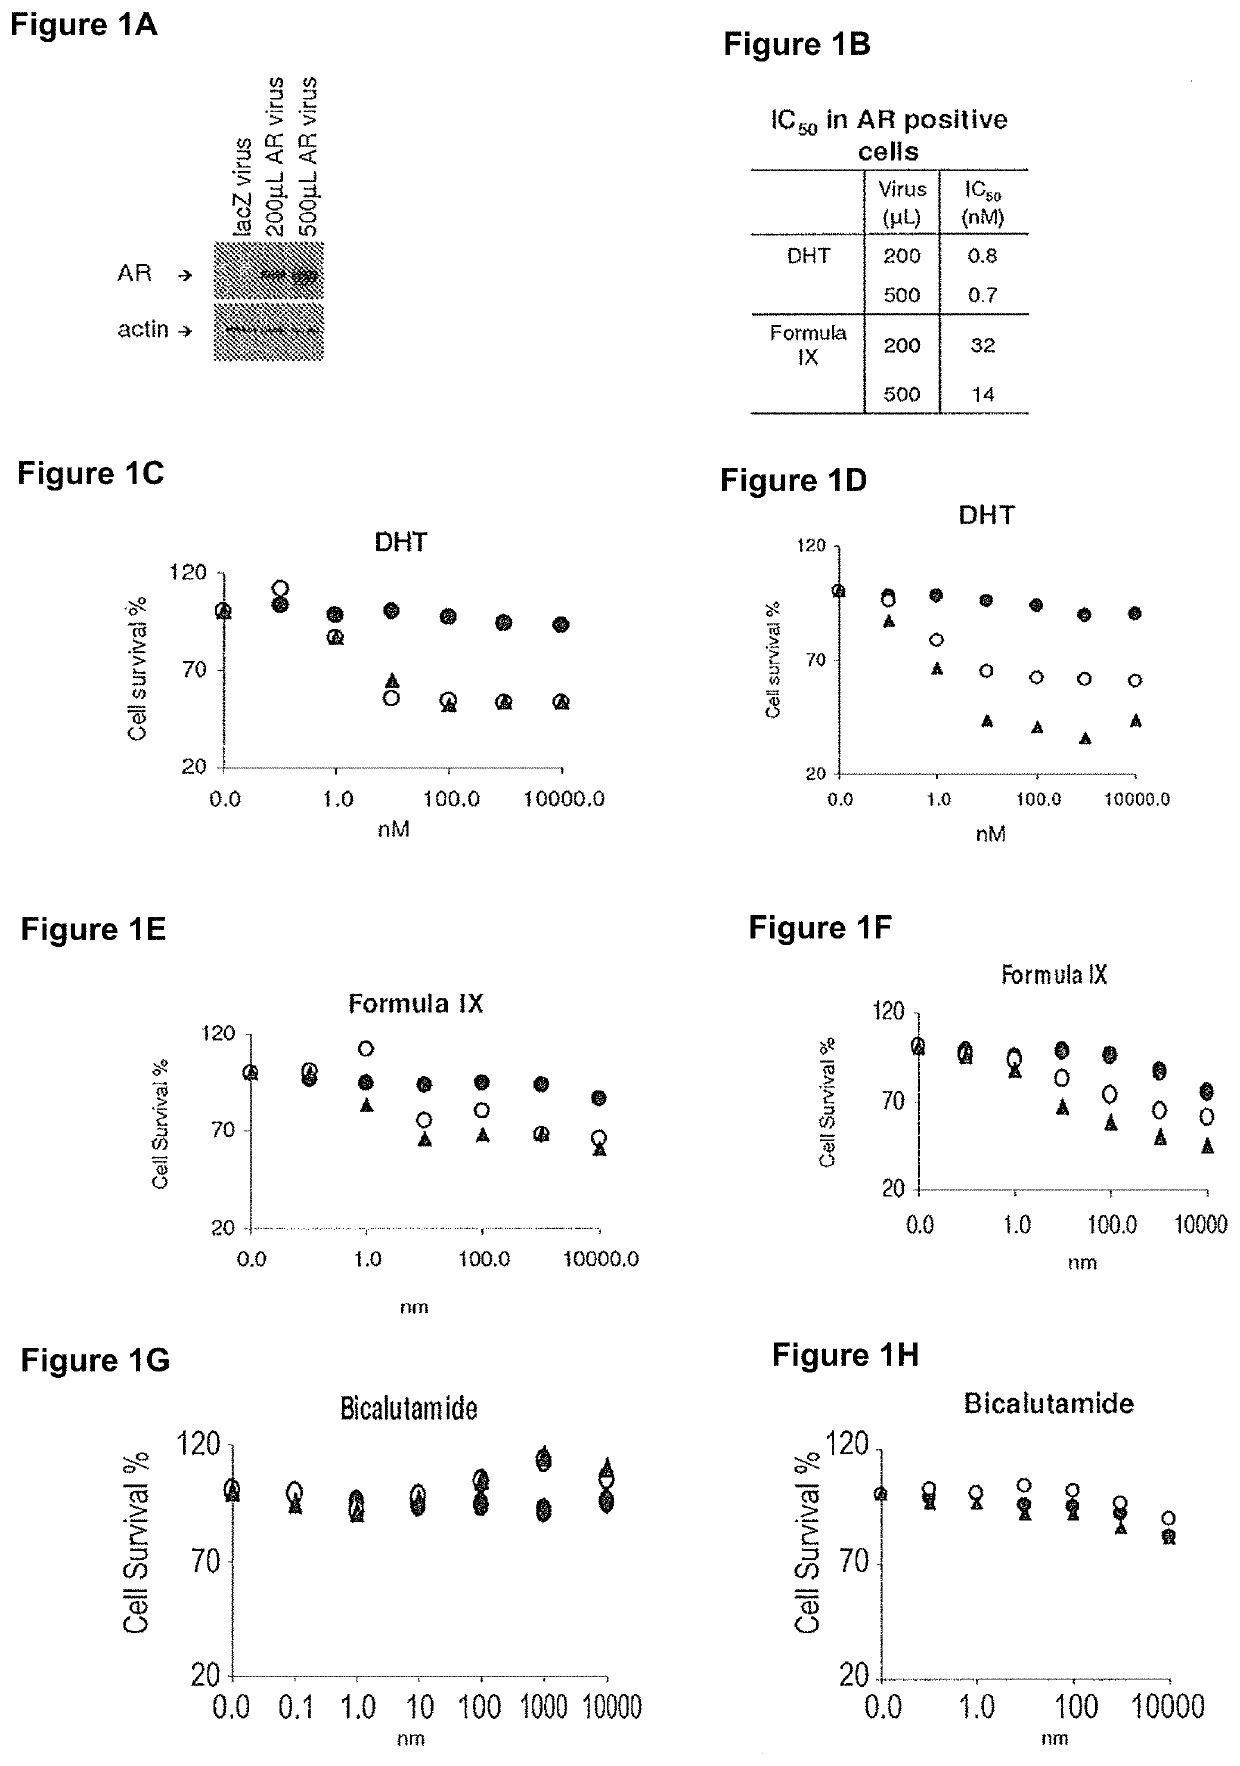 Method of treating ER mutant expressing breast cancers with selective androgen receptor modulators (SARMs)